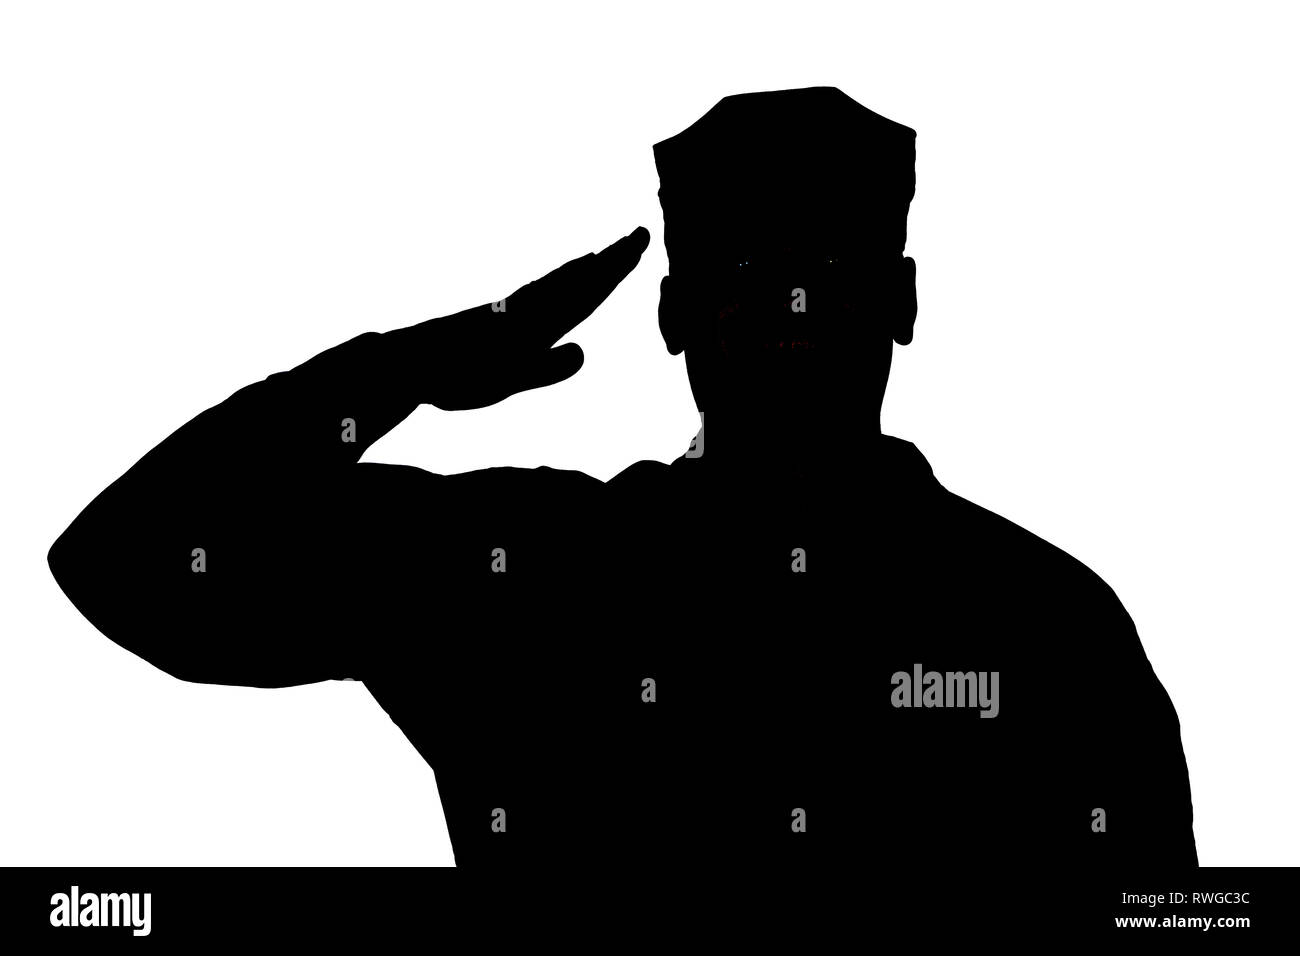 Silhouette of soldier giving hand salute. Stock Photo